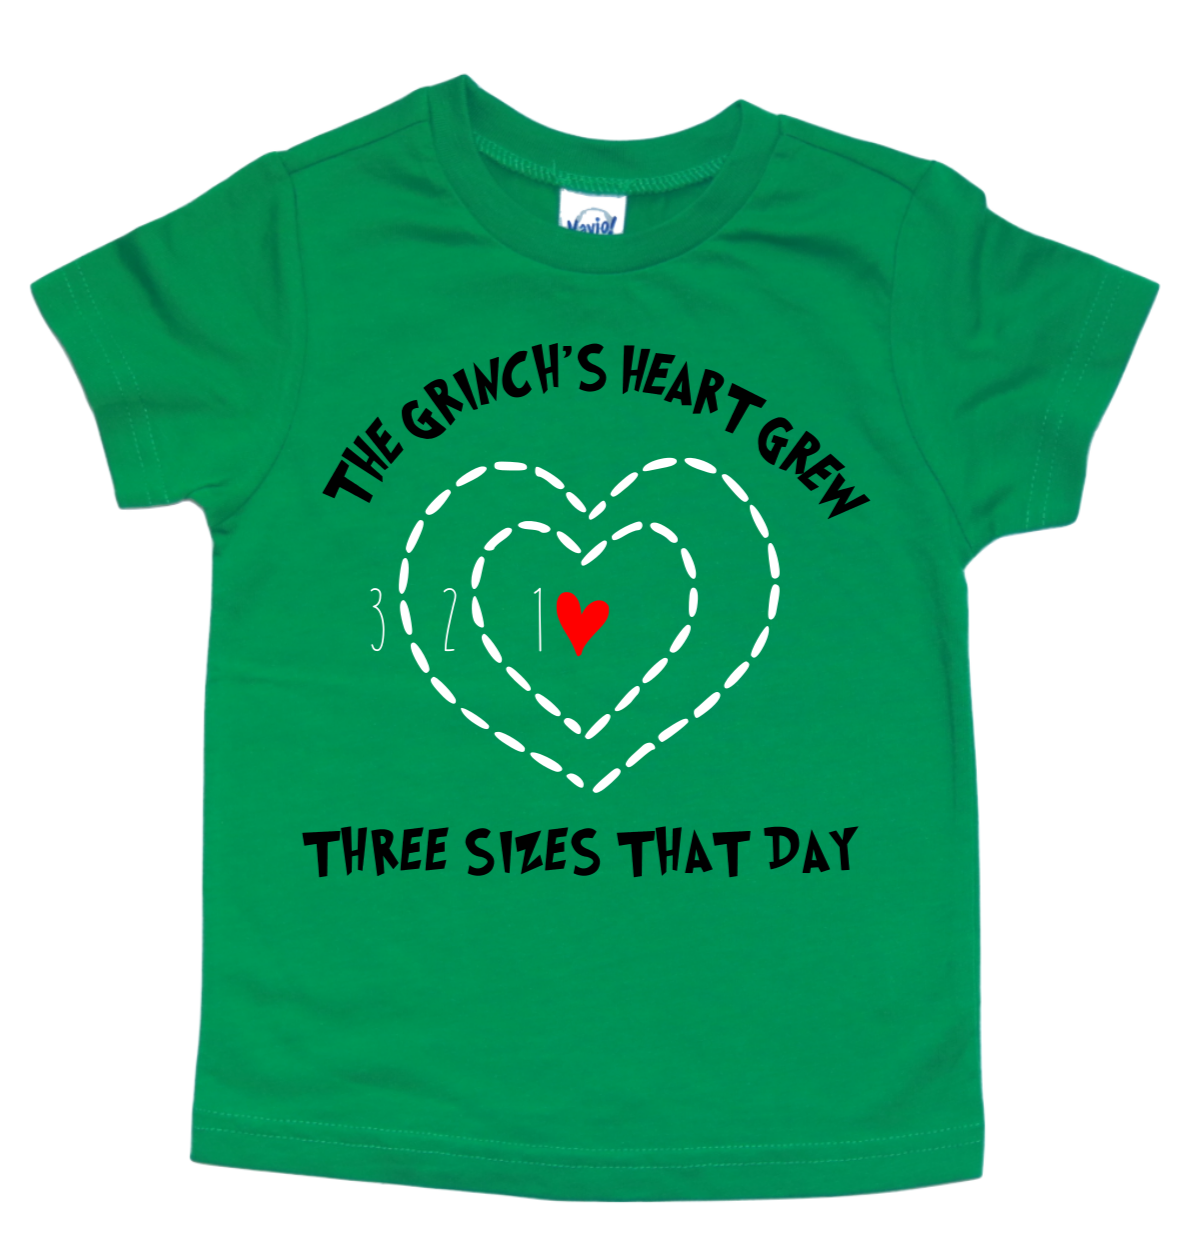 THE GRINCH’S HEART GREW THREE SIZES THAT DAY KIDS SHIRT